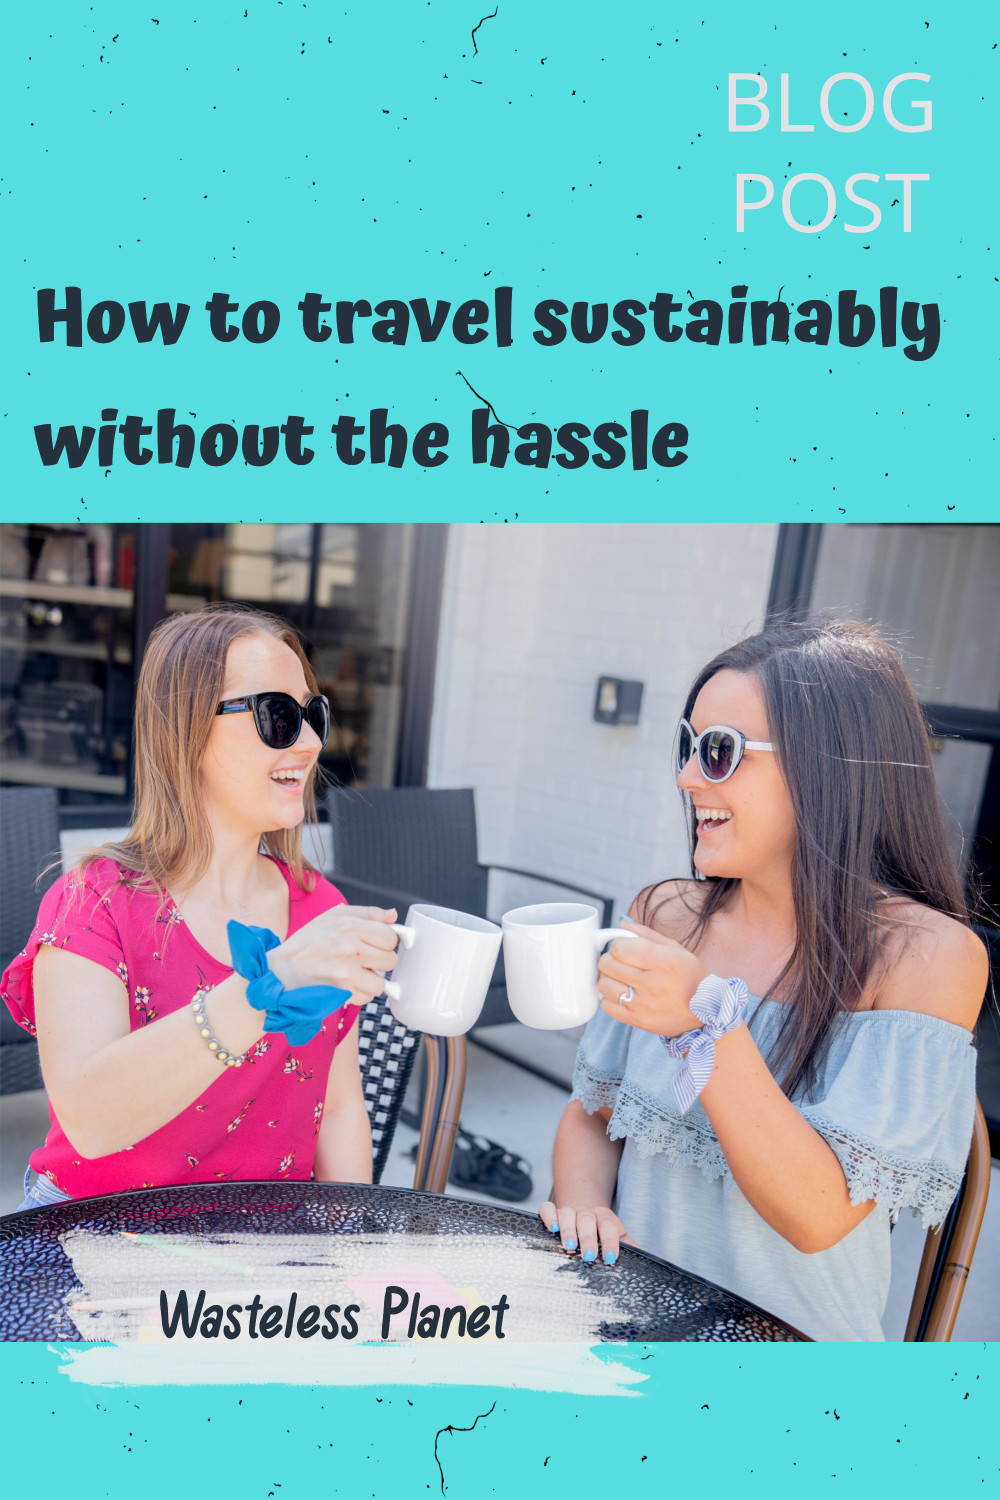 How to travel sustainably without the hassle